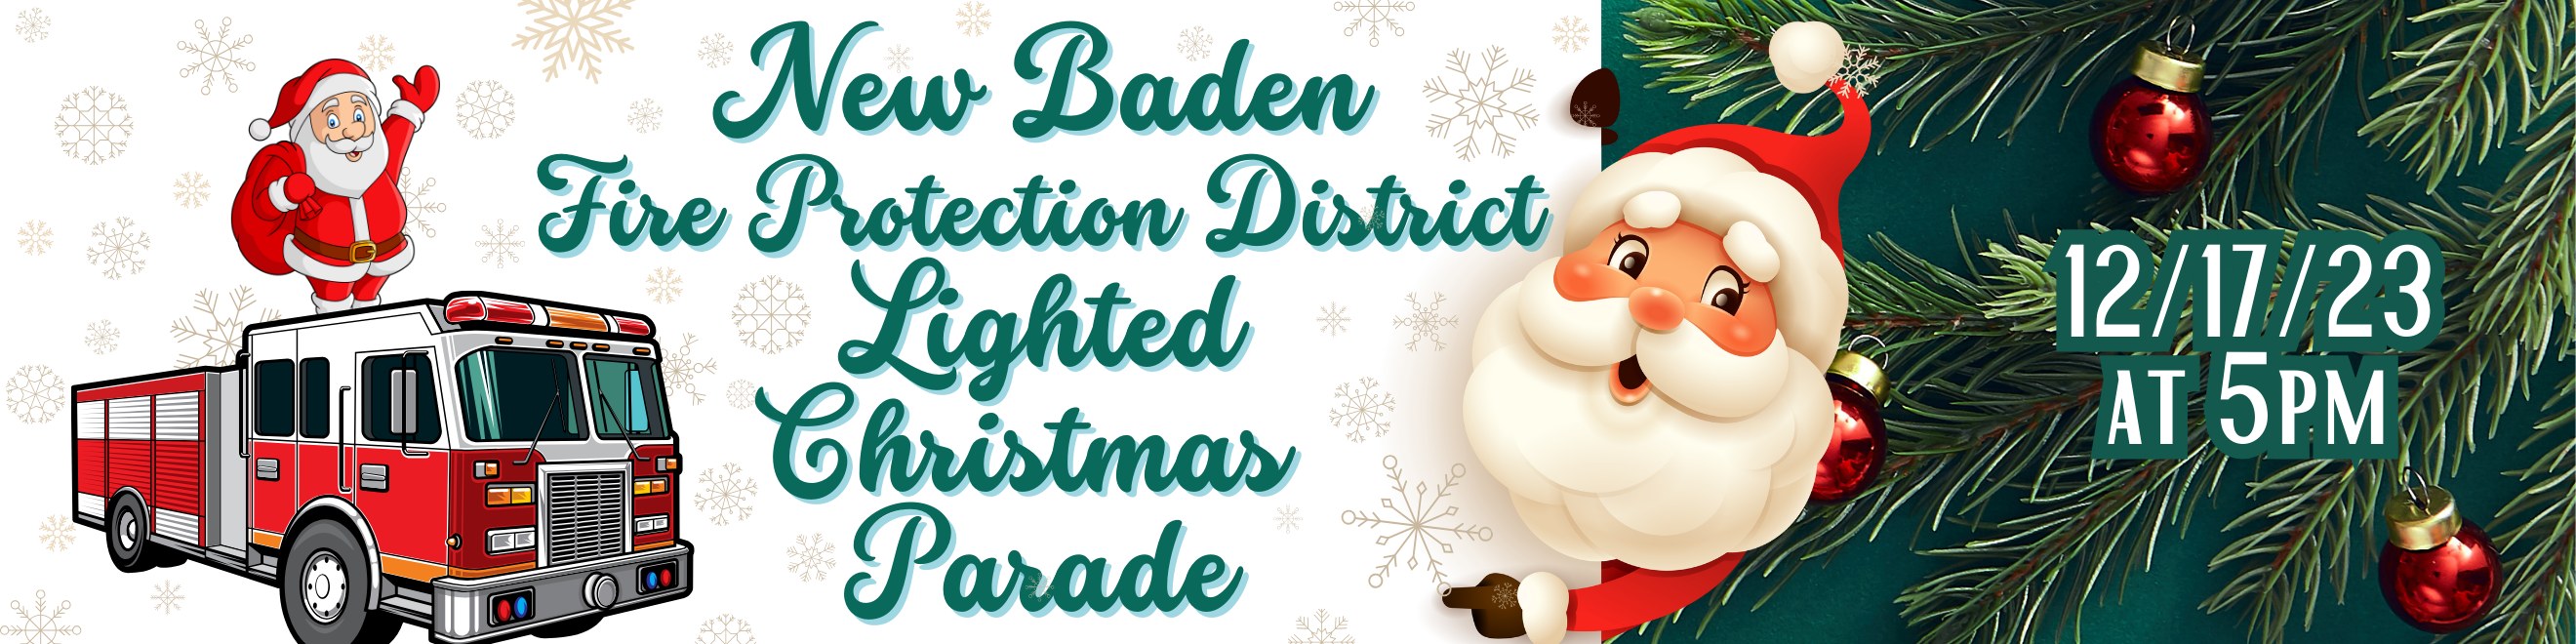 New Baden Fire Protection District Lighted Christmas Parade